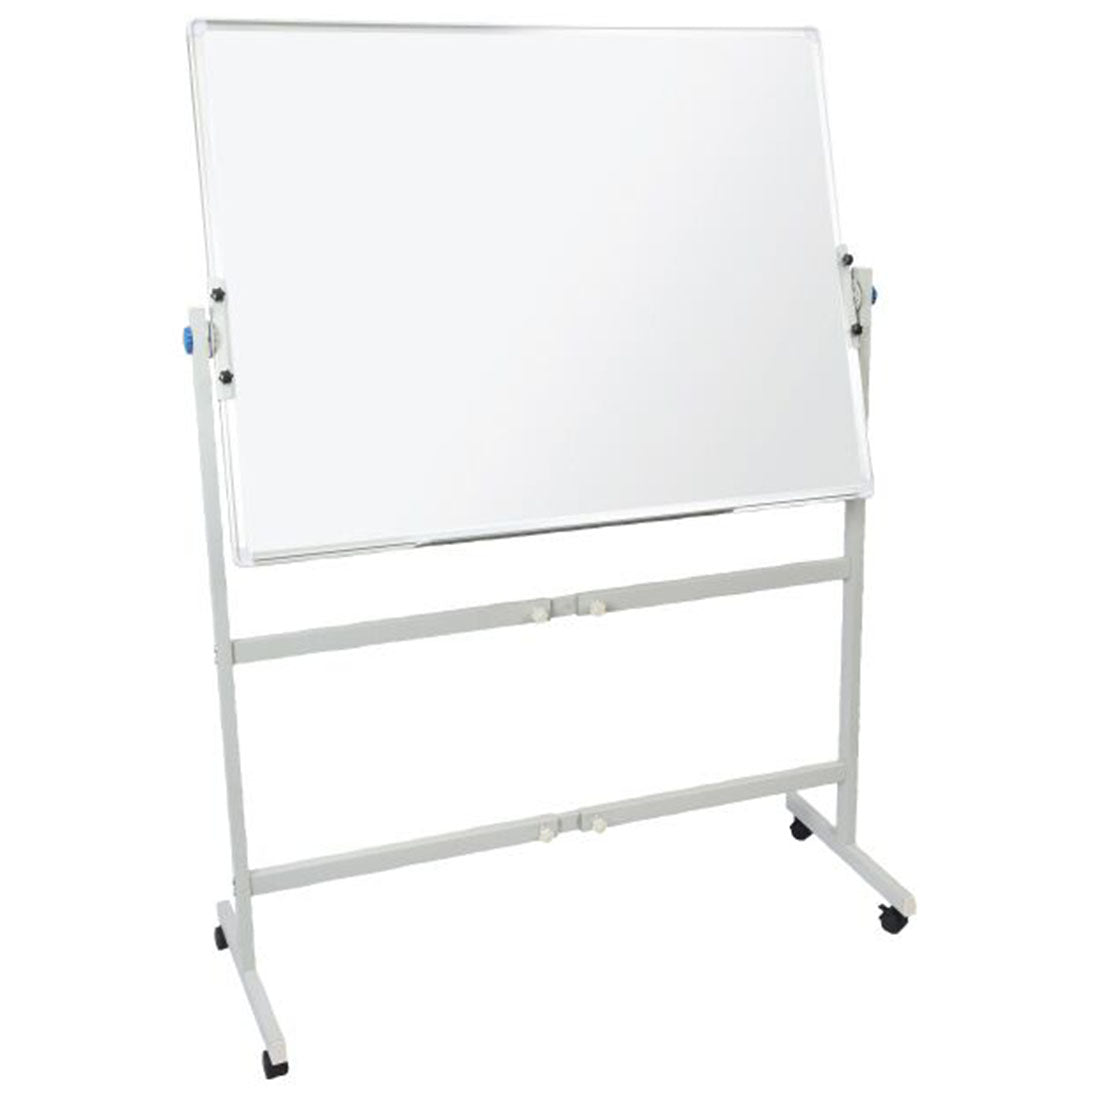 Mobile Pivoting White Boards - switchoffice.com.au